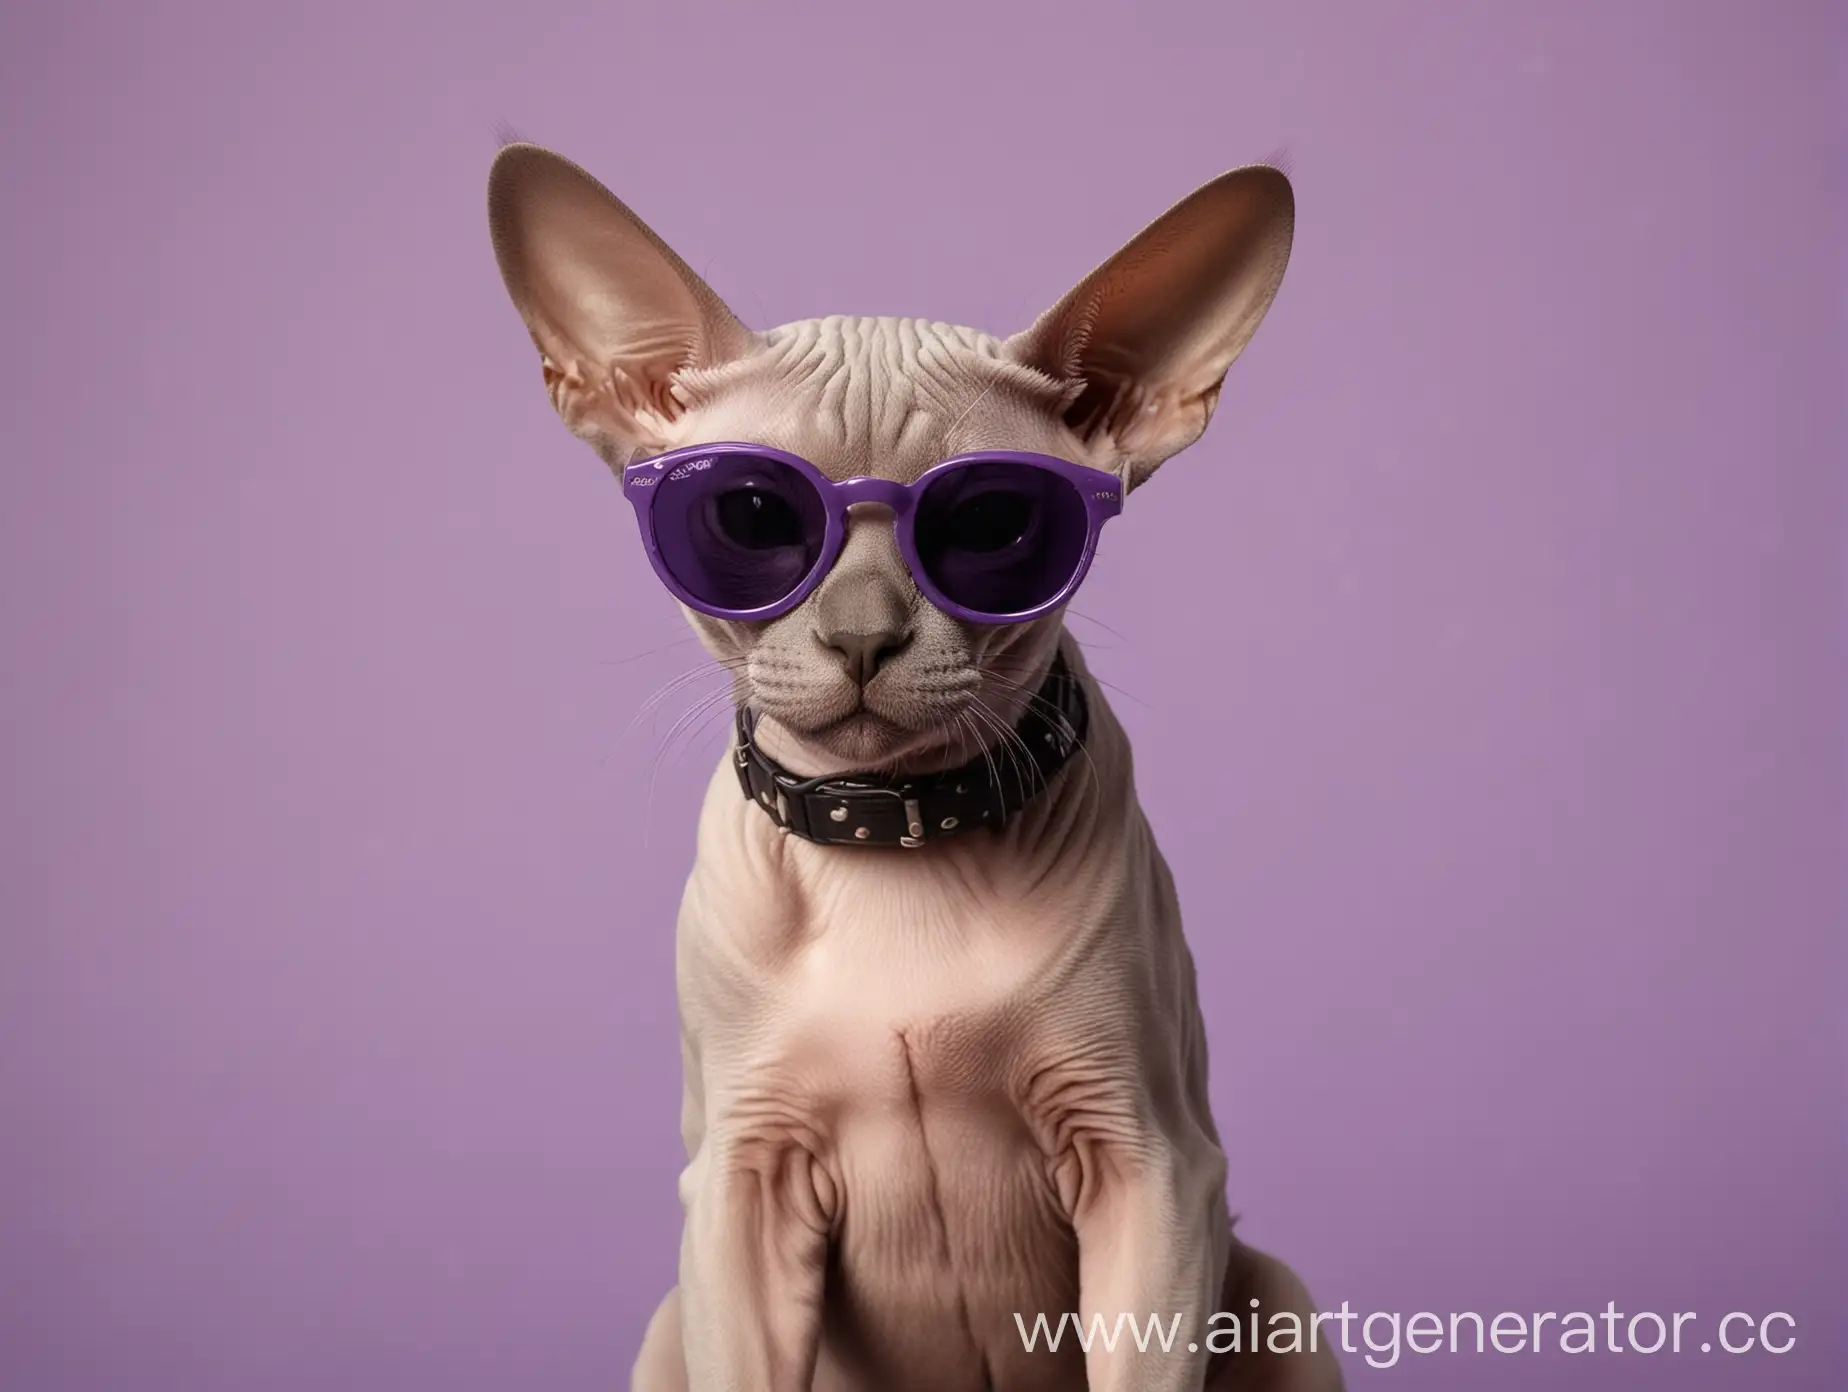 Cool-Sphinx-Cat-Catching-with-Front-Paws-on-Lavender-Background